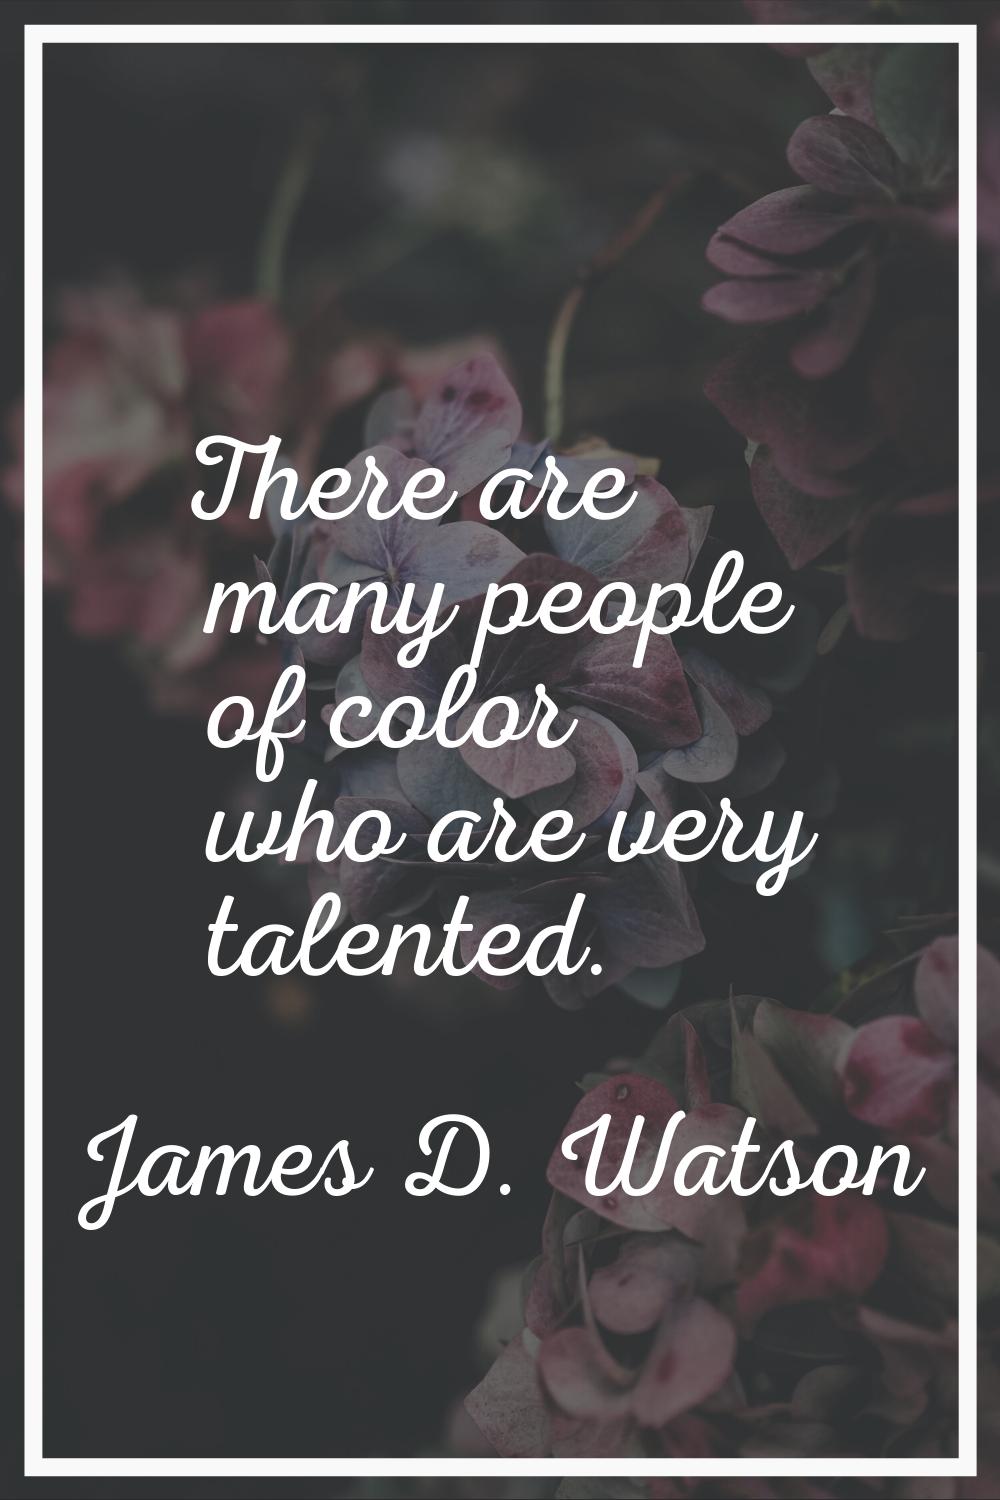 There are many people of color who are very talented.